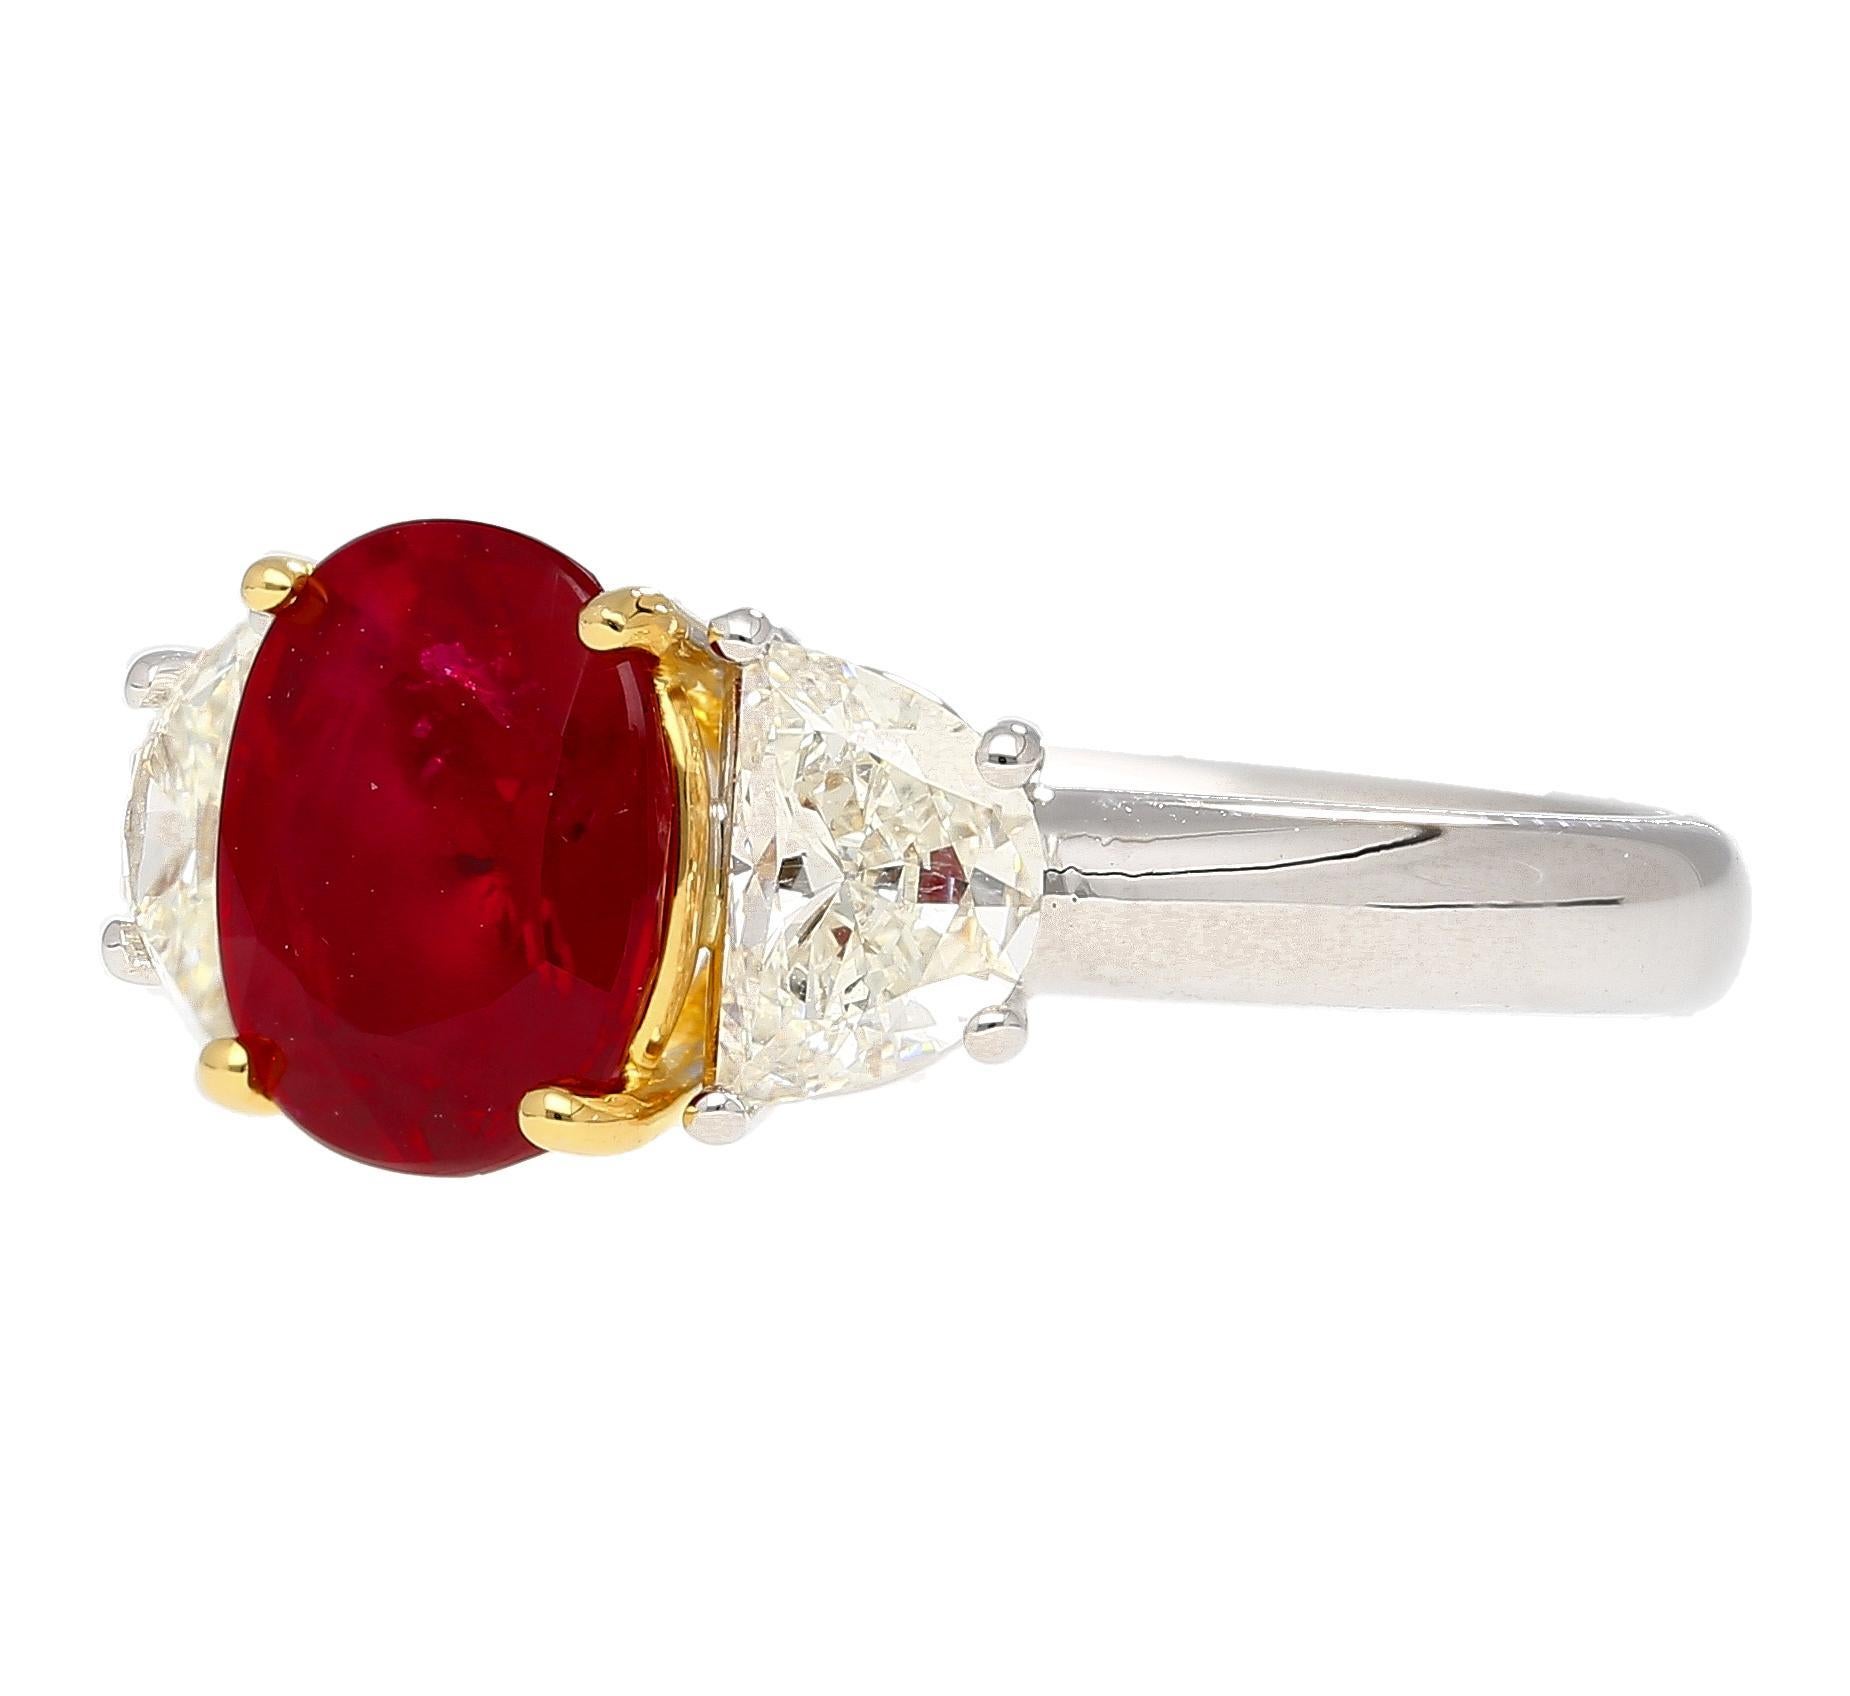 AGL Certified 2.19 carat no heat Burma ruby ring. Adorned with 2 trapezoid cut diamonds totaling 0.97 cttw. The gemstones are set in prong setting; ruby is set in 18k yellow gold and the diamonds are set in 18k white gold. 

Details: 
✔ Item Type: